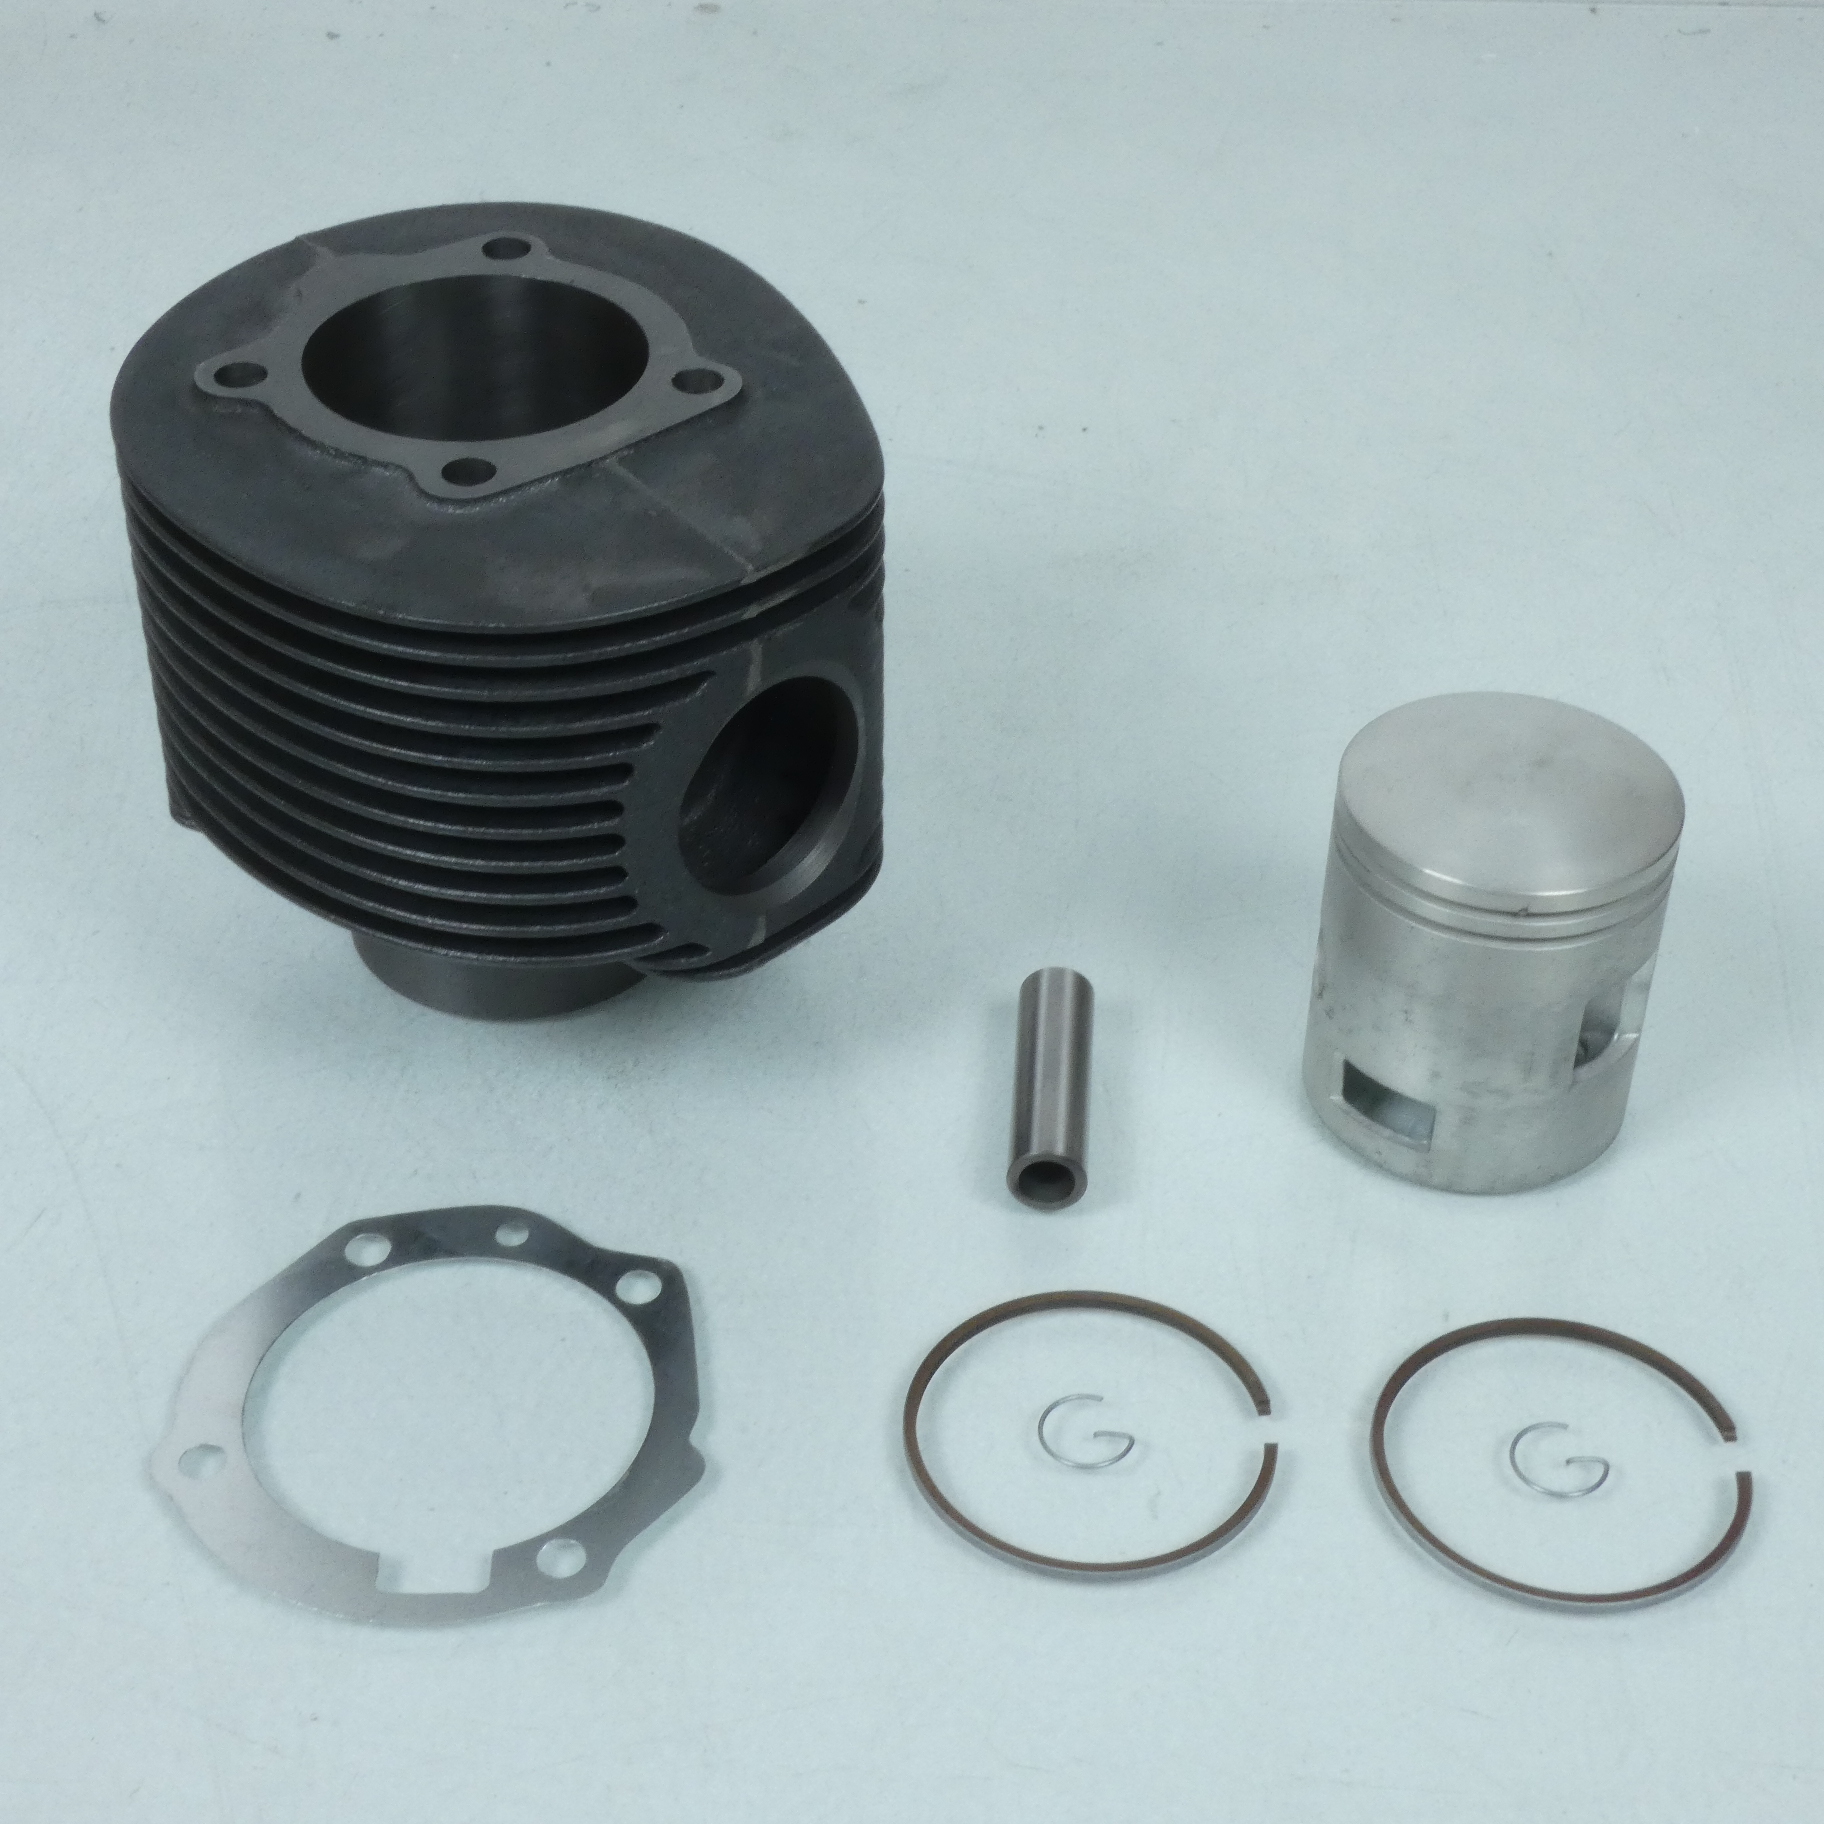 Kit Cylindre piston Ø66.5mm P2R pour scooter Piaggio 200 Cosa Axe Ø16mm L58mm